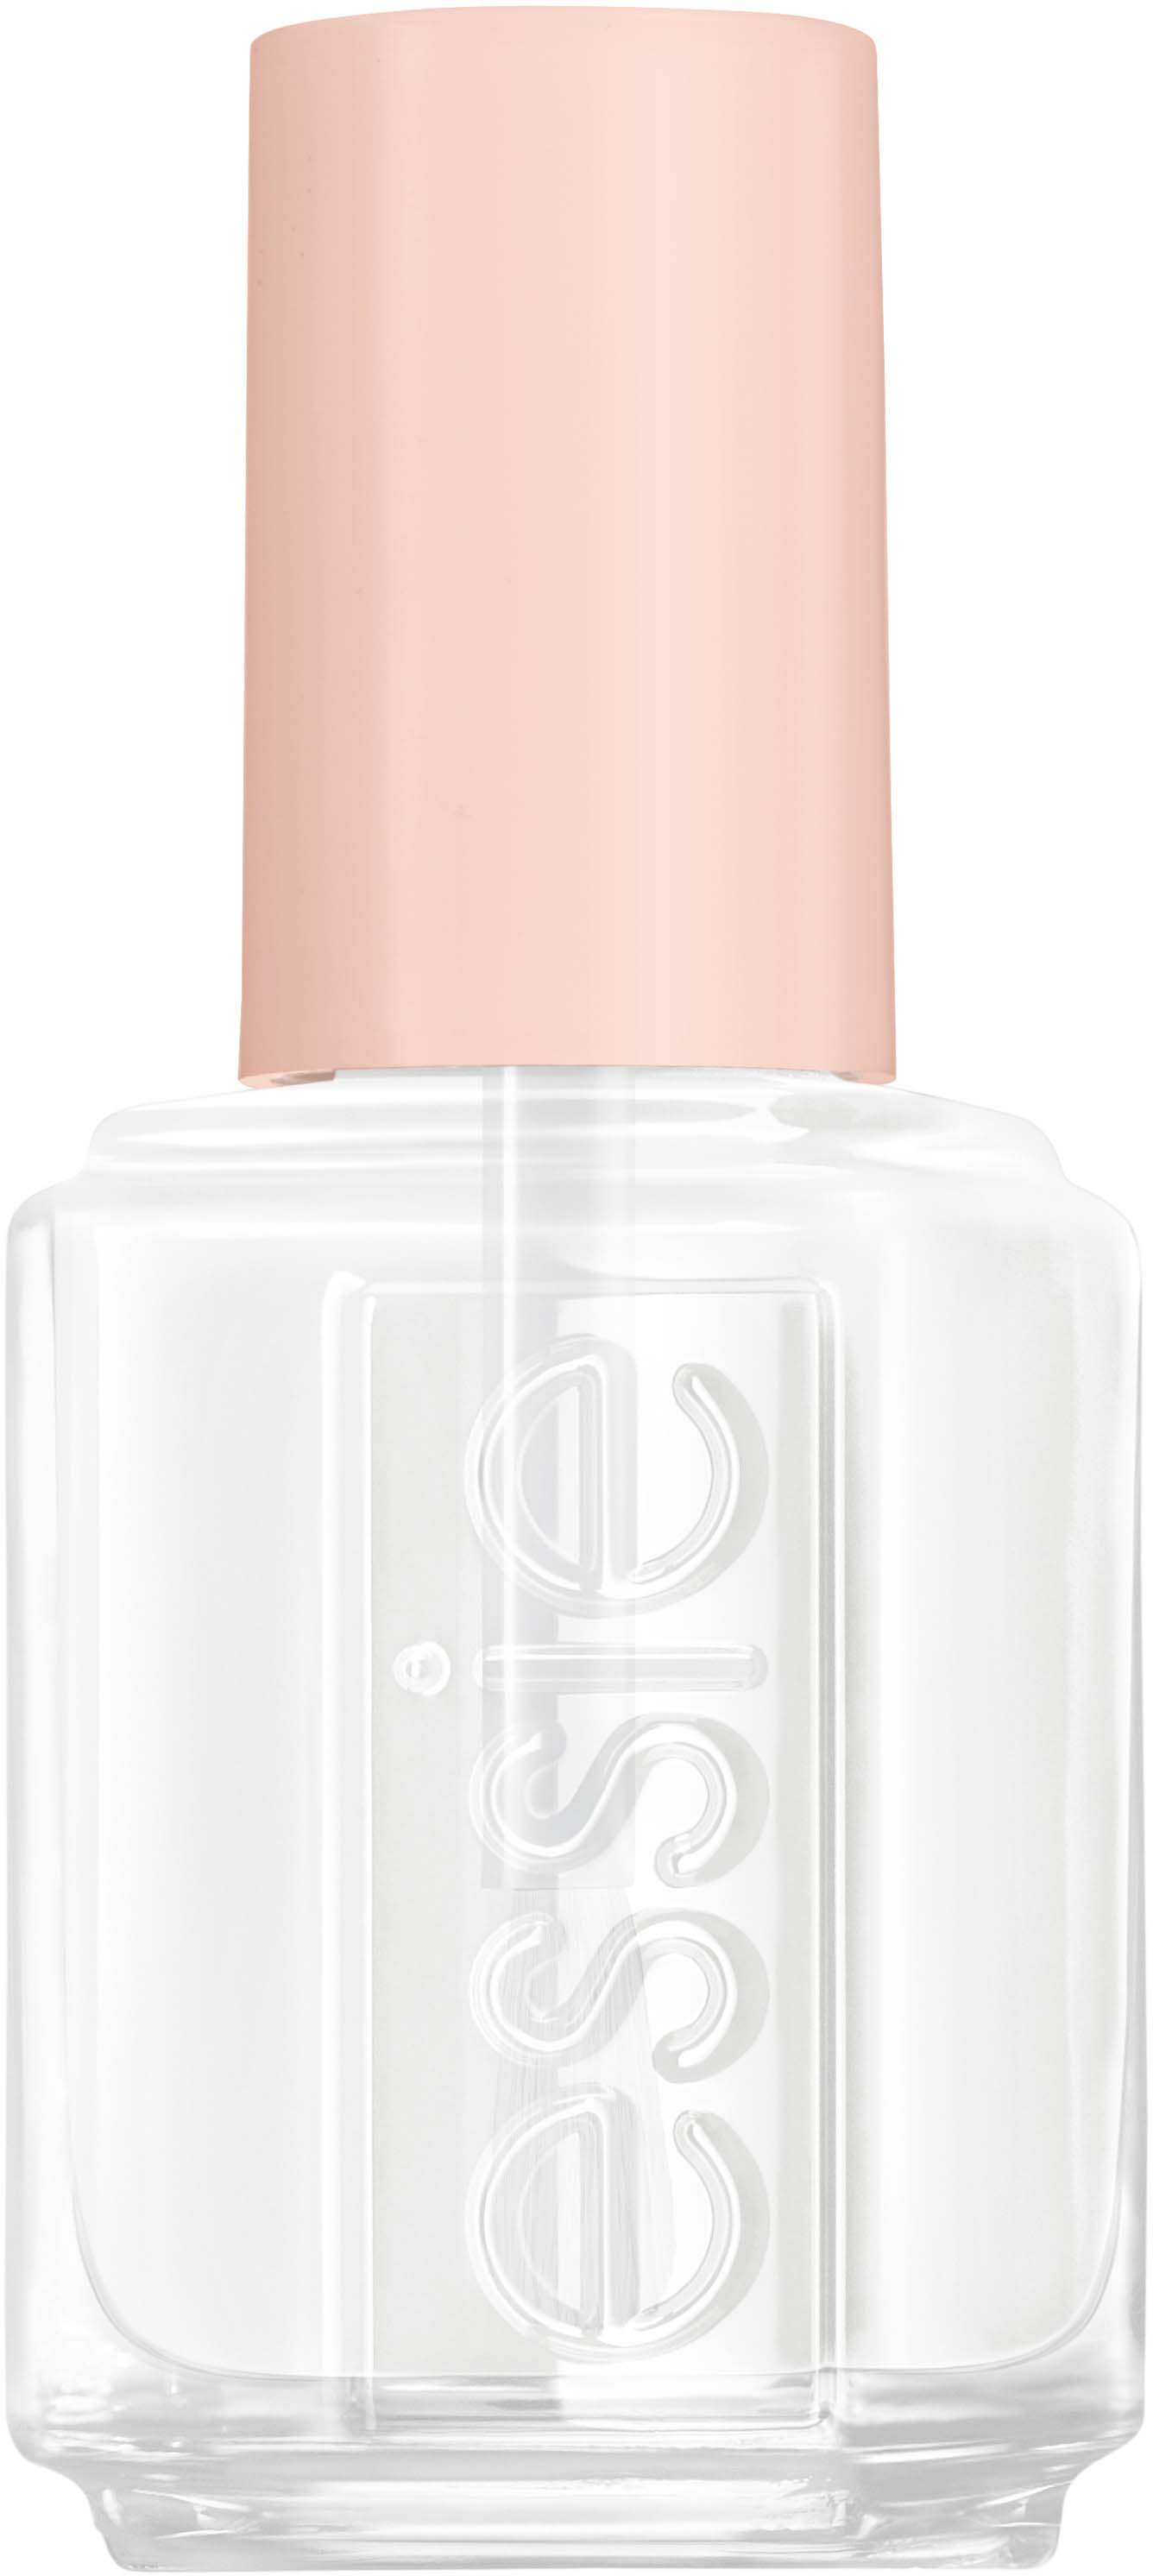 LOVE Plant-based The Essie 80% 130 Make Nail Essie by Color Move